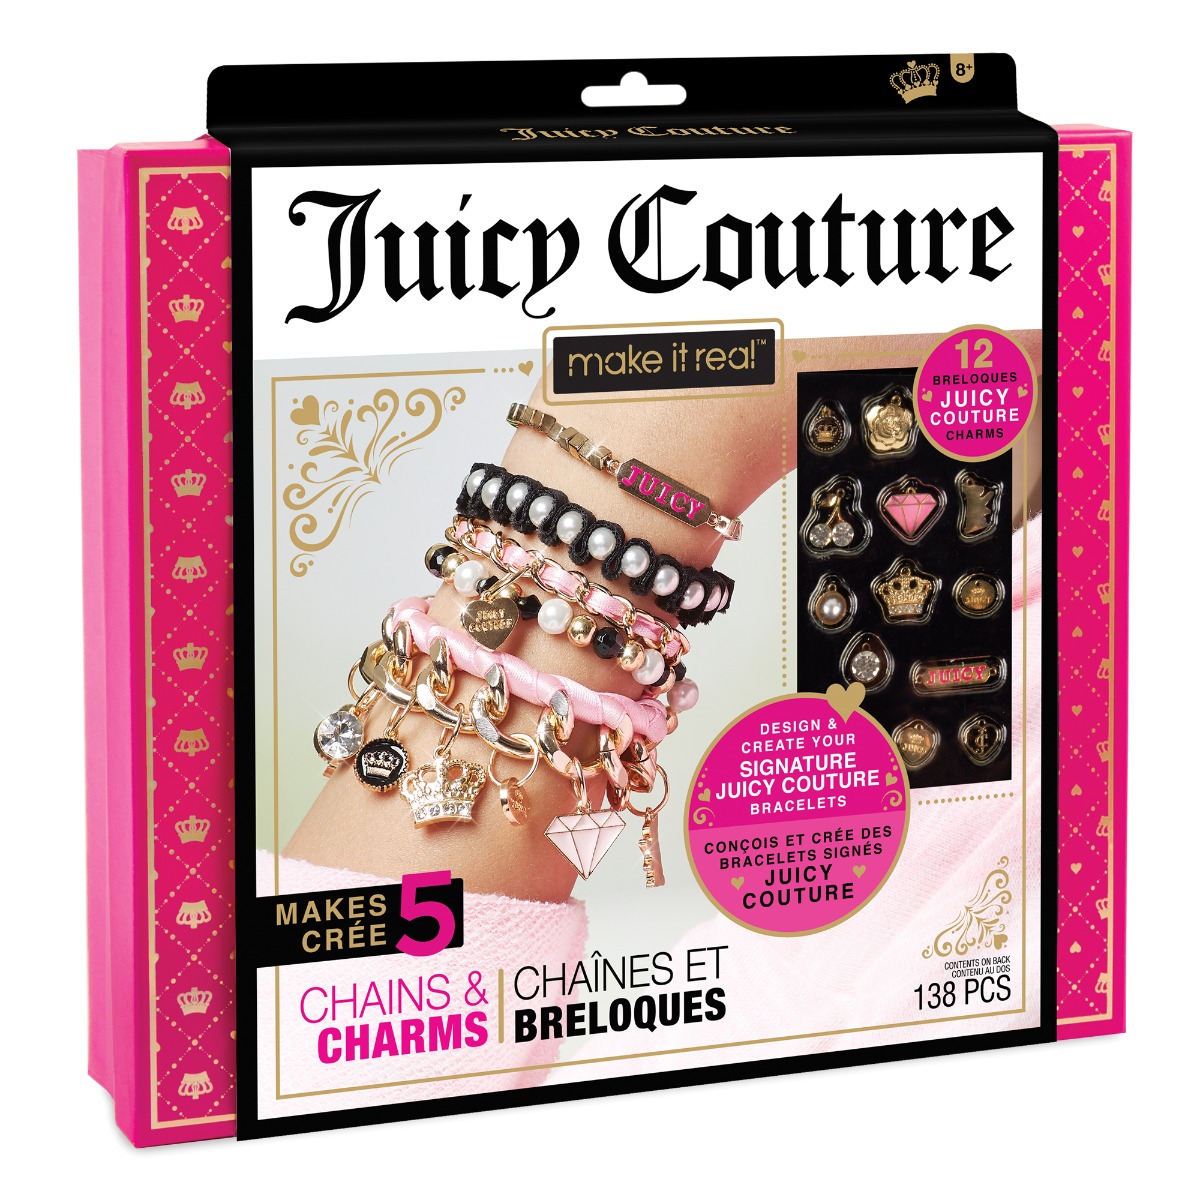 Poze Set de bratari Juicy Couture Chains and Charms, Make It Real, 138 piese